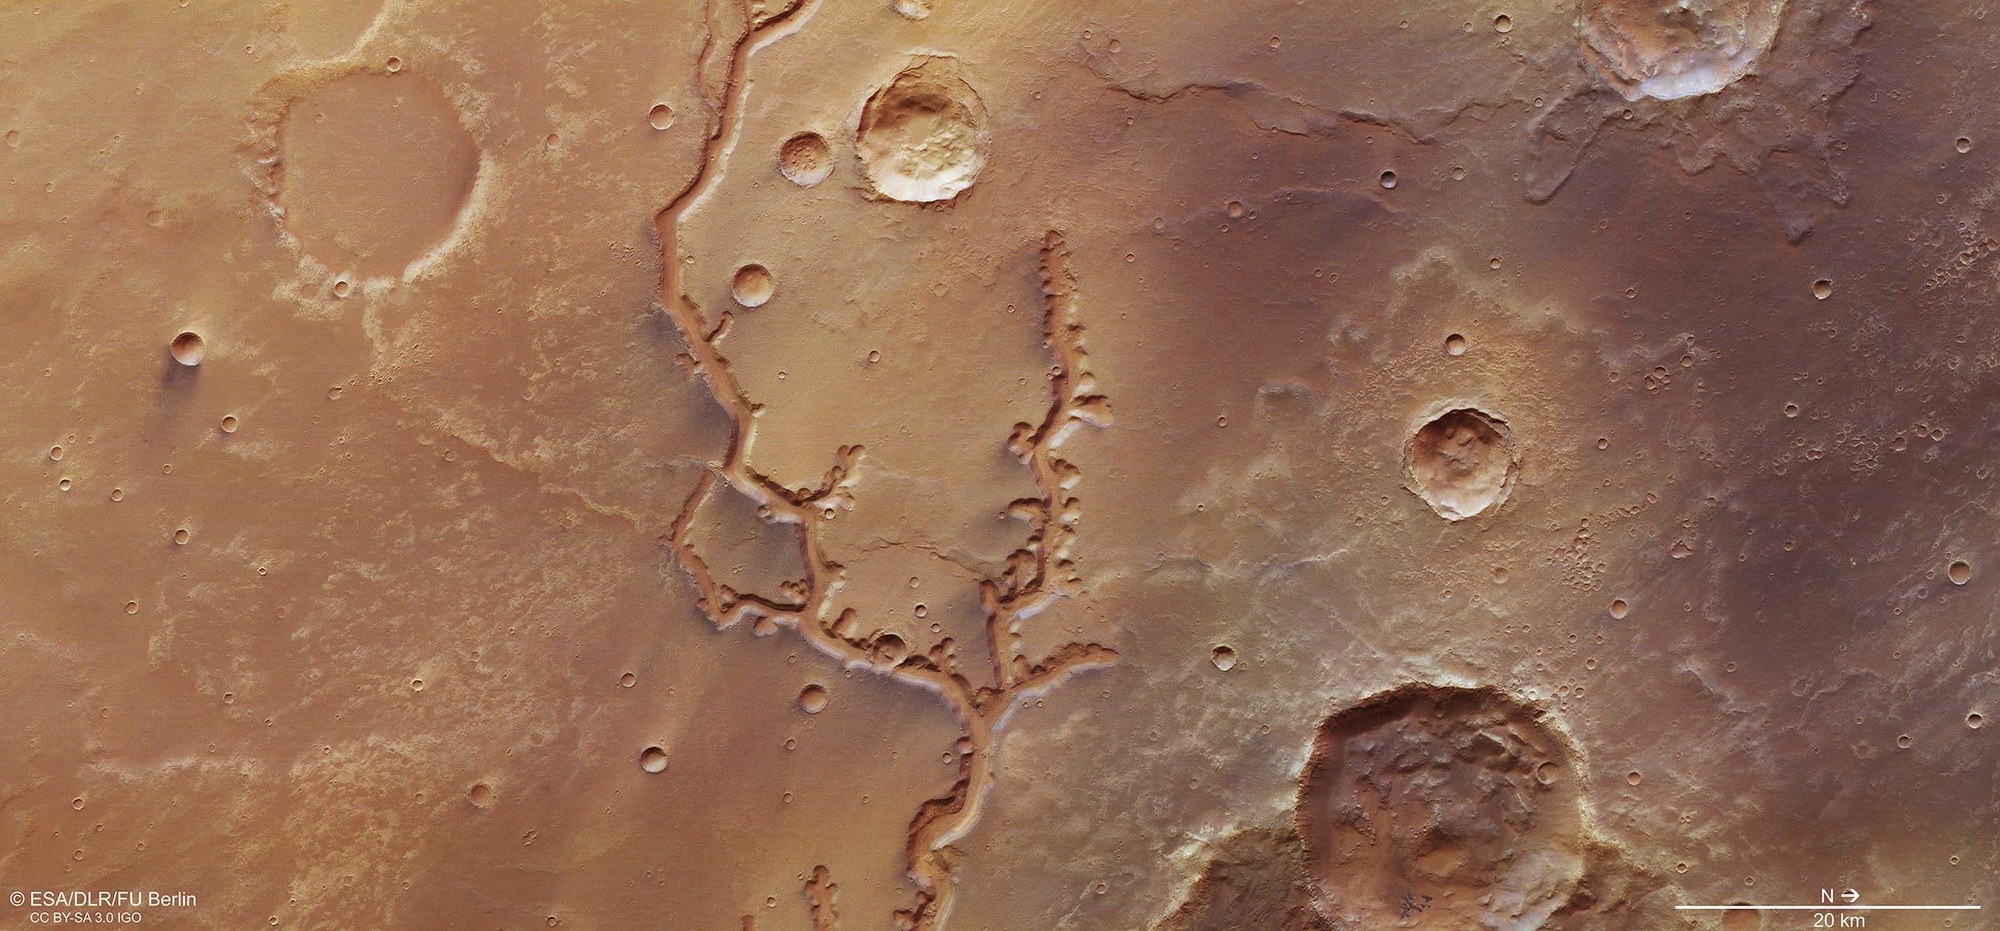 View of the western part of the upper reaches of Nirgal Vallis